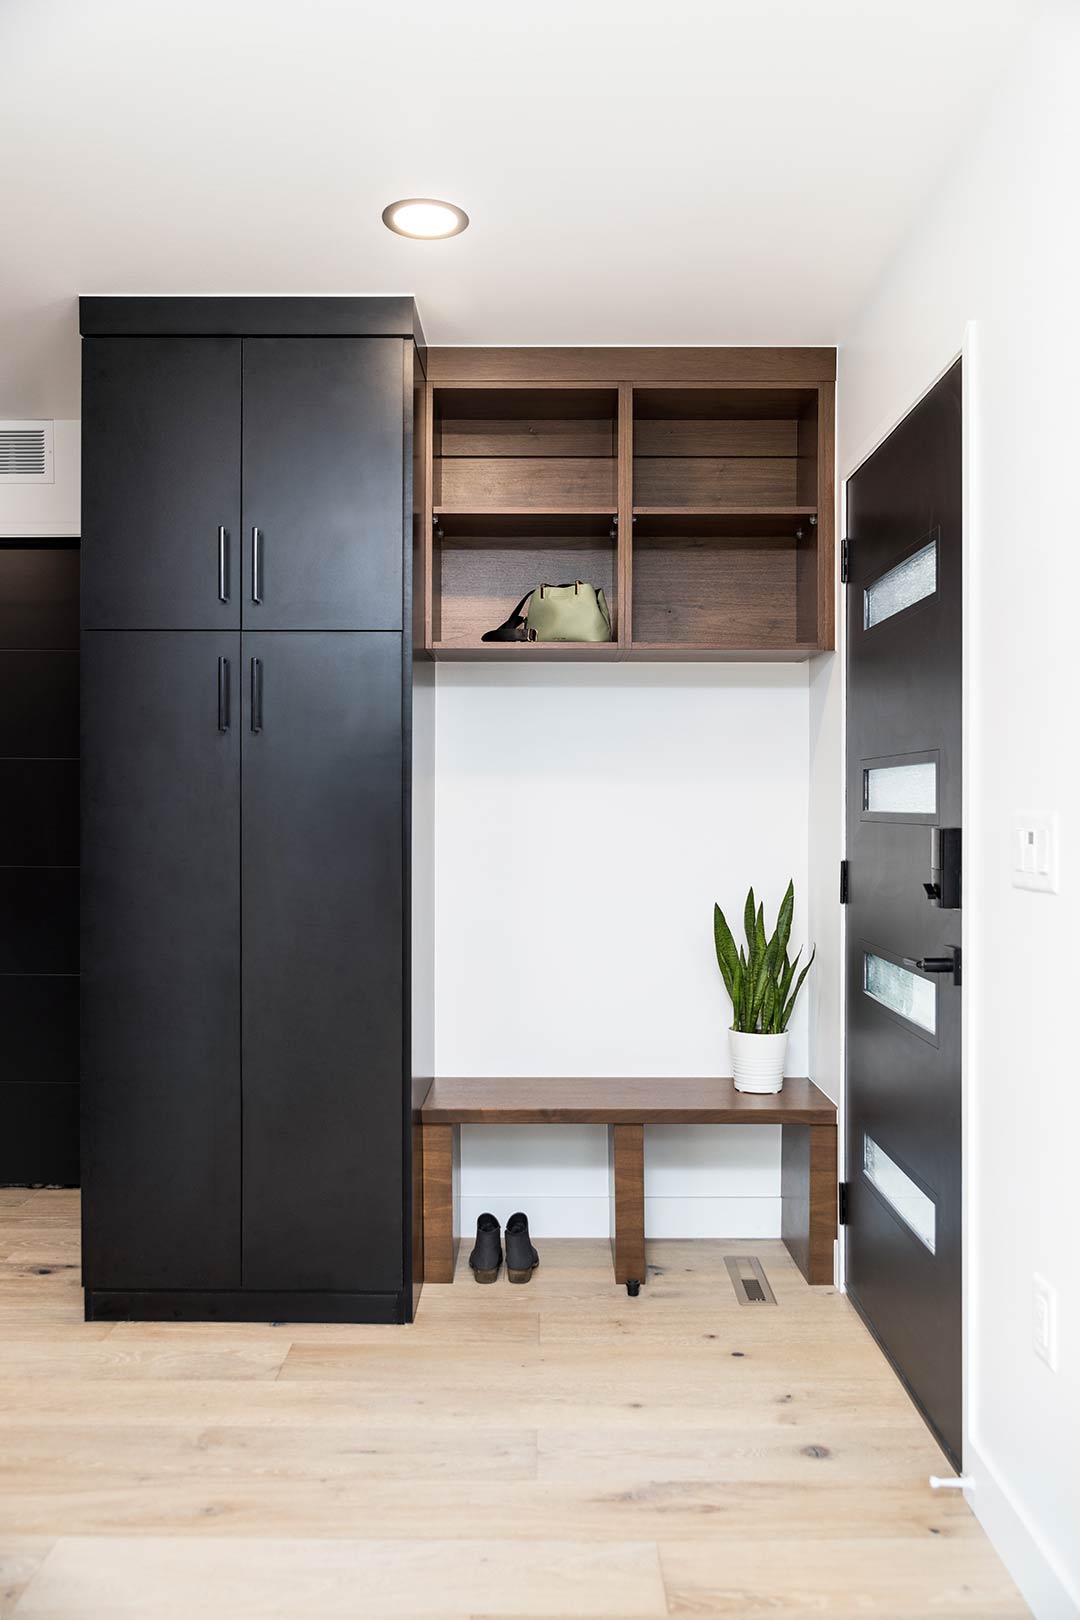 The mudroom at Mulberry Street recycled the family's original front door and was painted a matte black to match the built in cabinets and bench for additional storage.